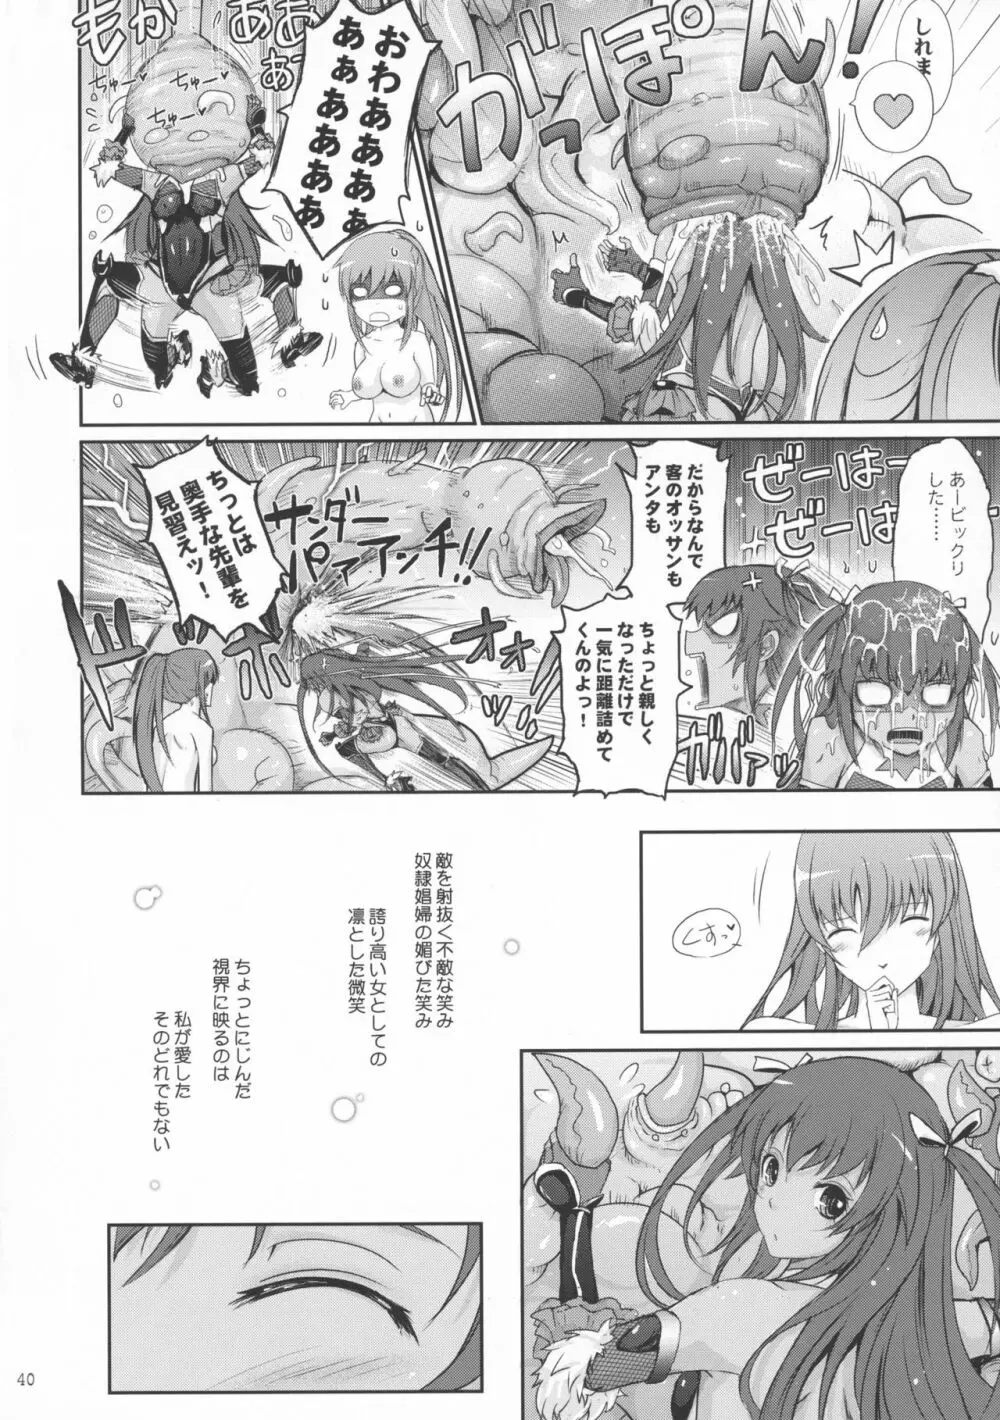 TENTACLES 隷嬢秋山凛子の蜜箱 Page.40